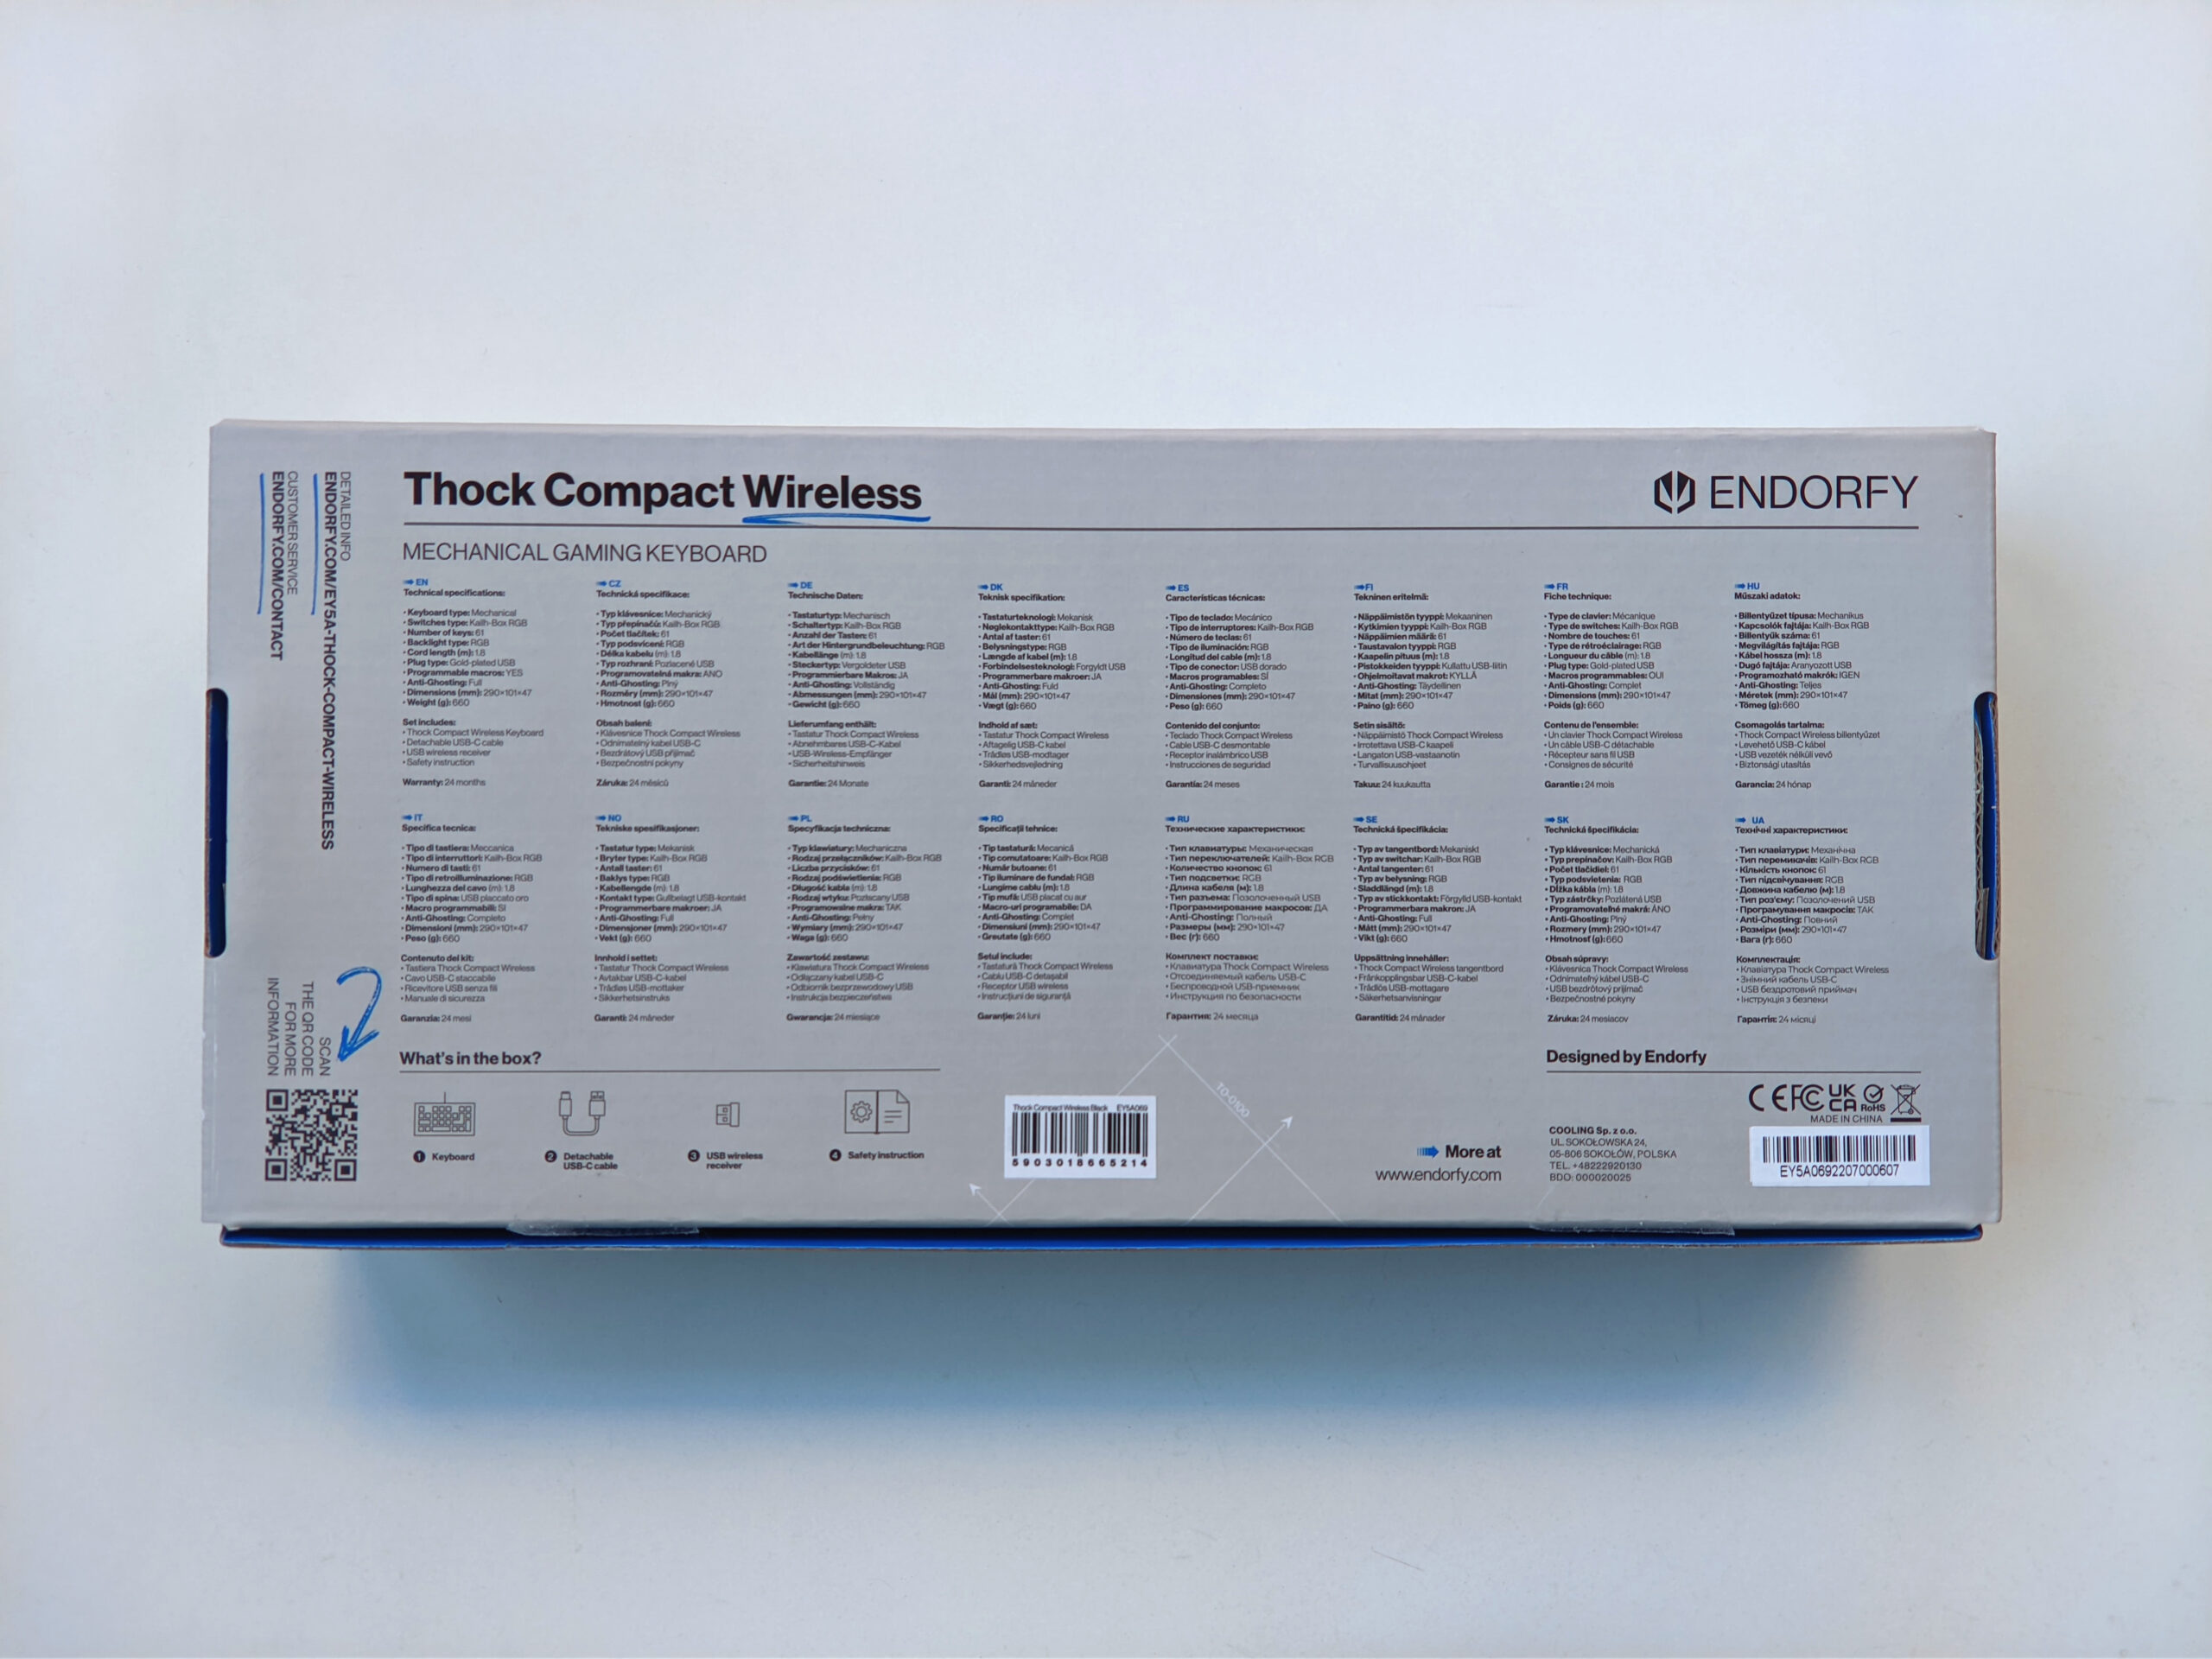 ENDORFY Thock Compact Wireless